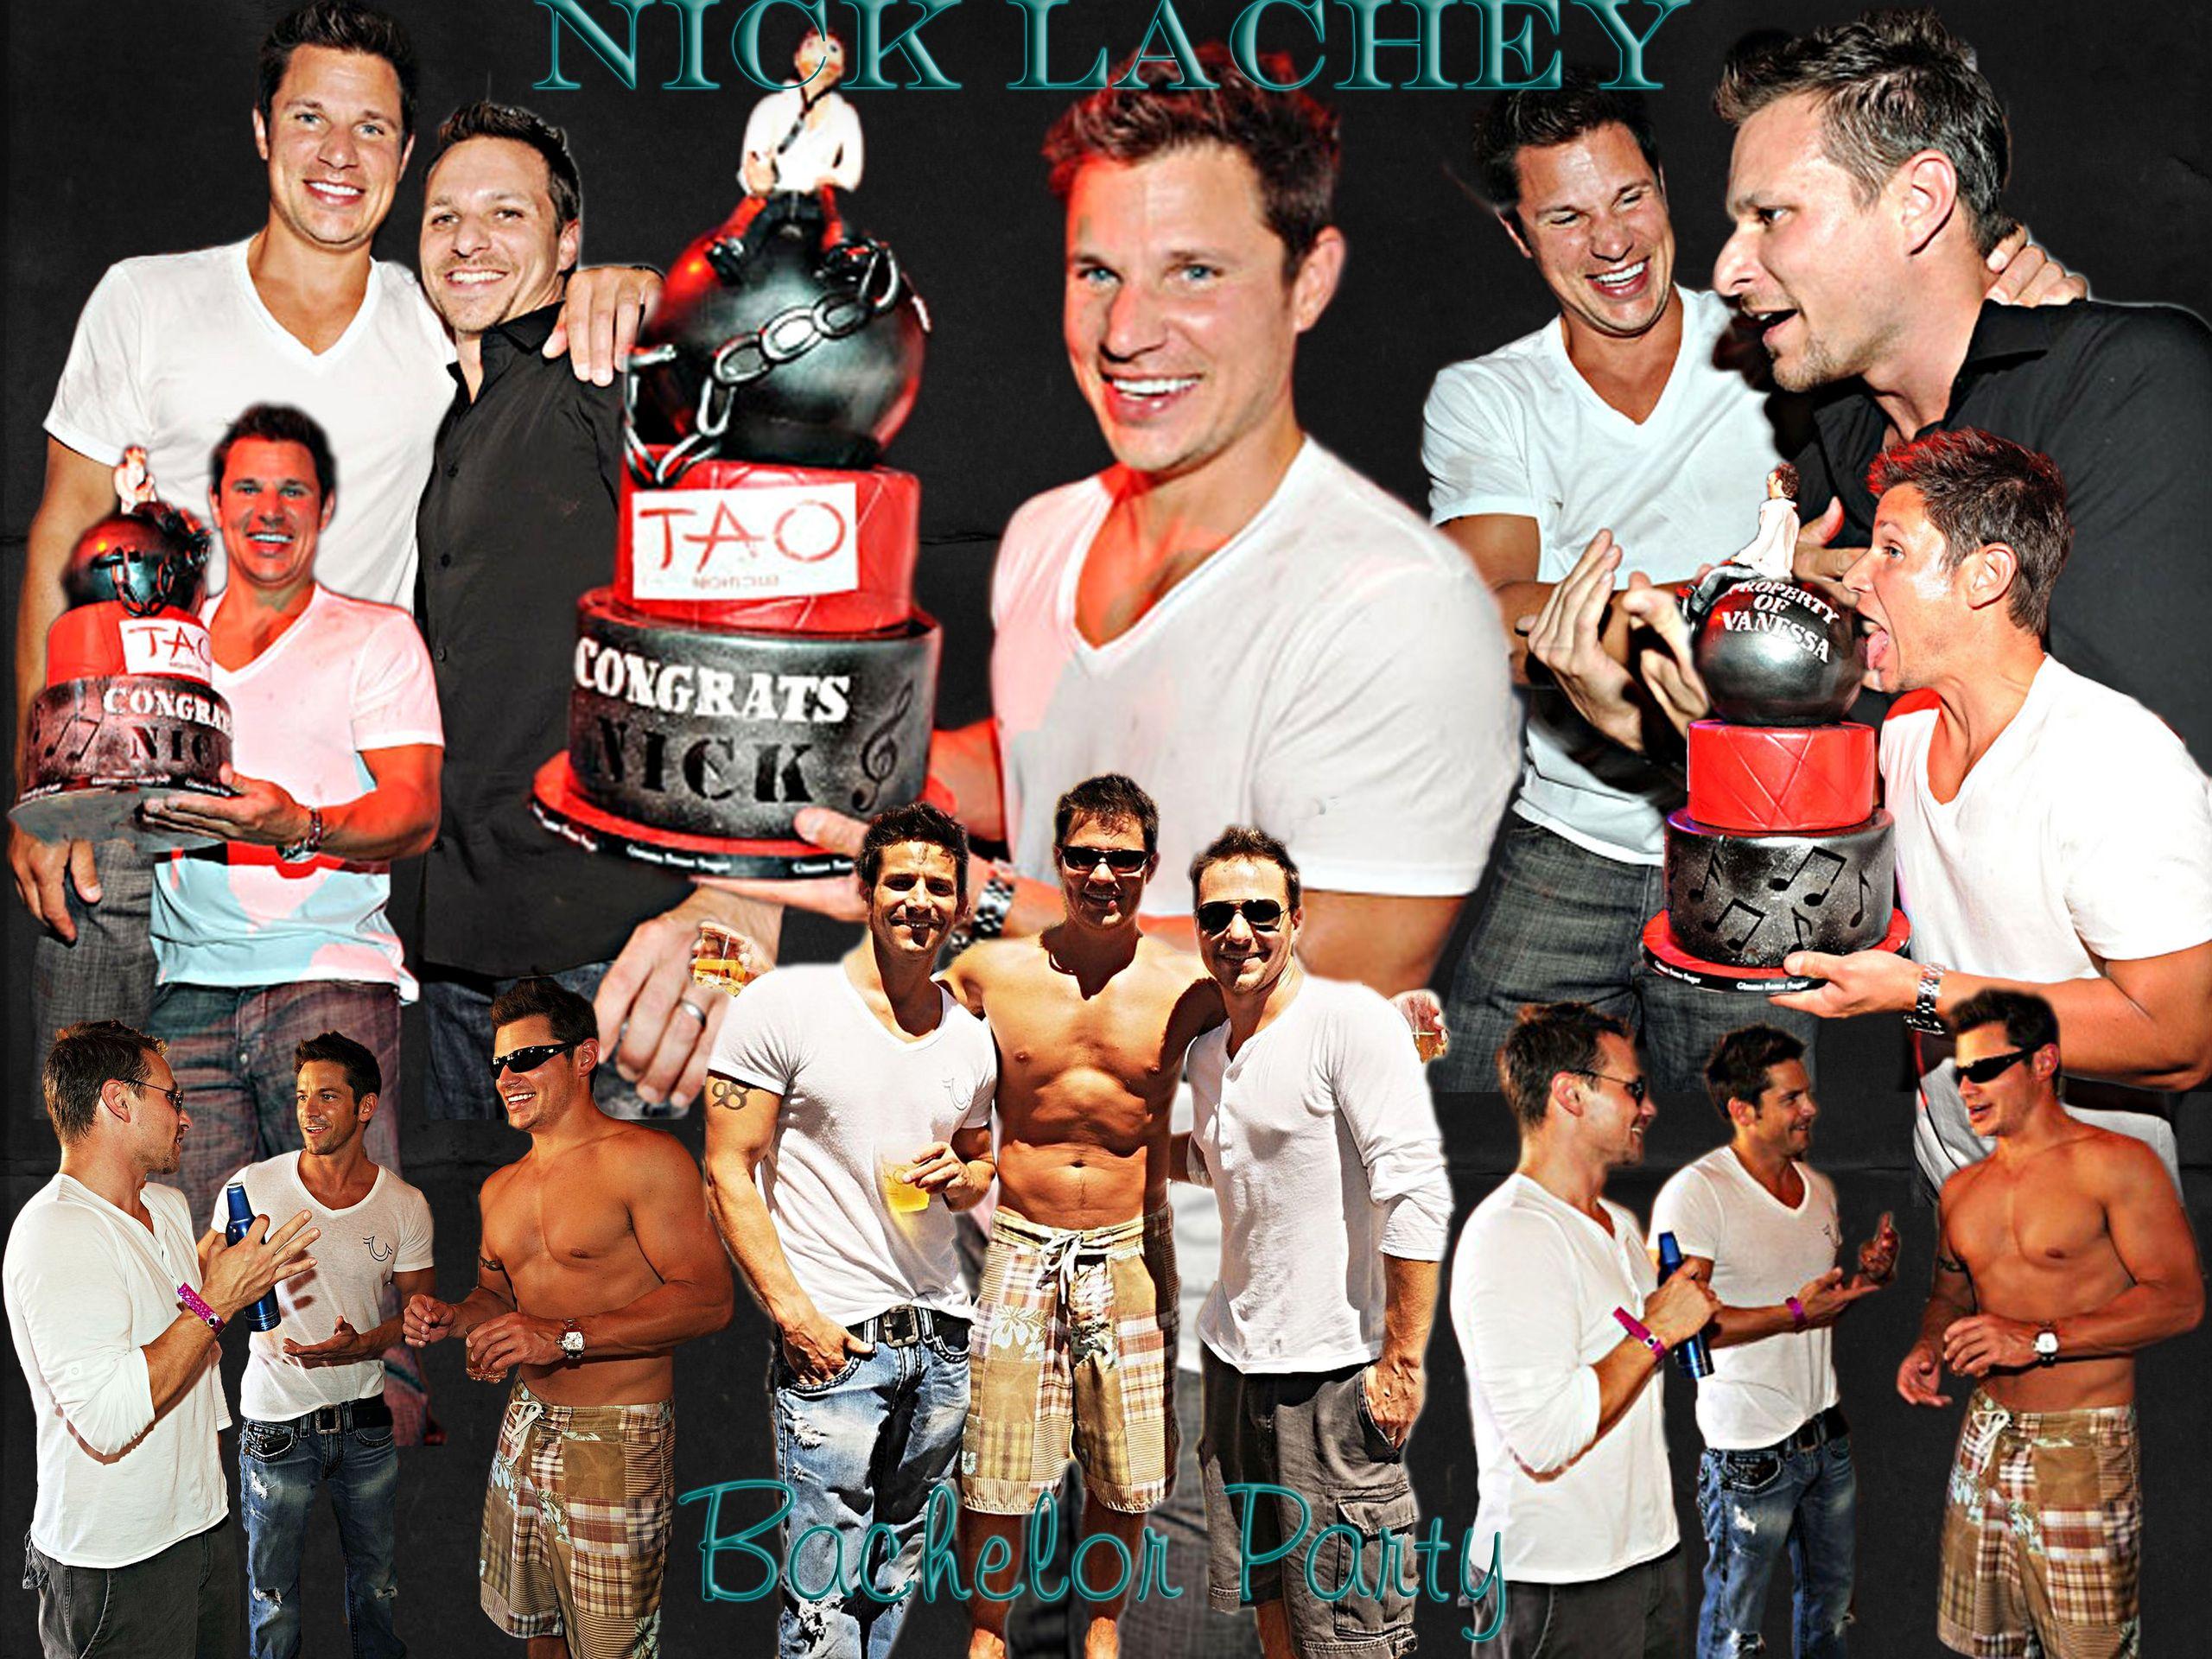 Nick Lachey image Bachelor Party HD wallpaper and background photo